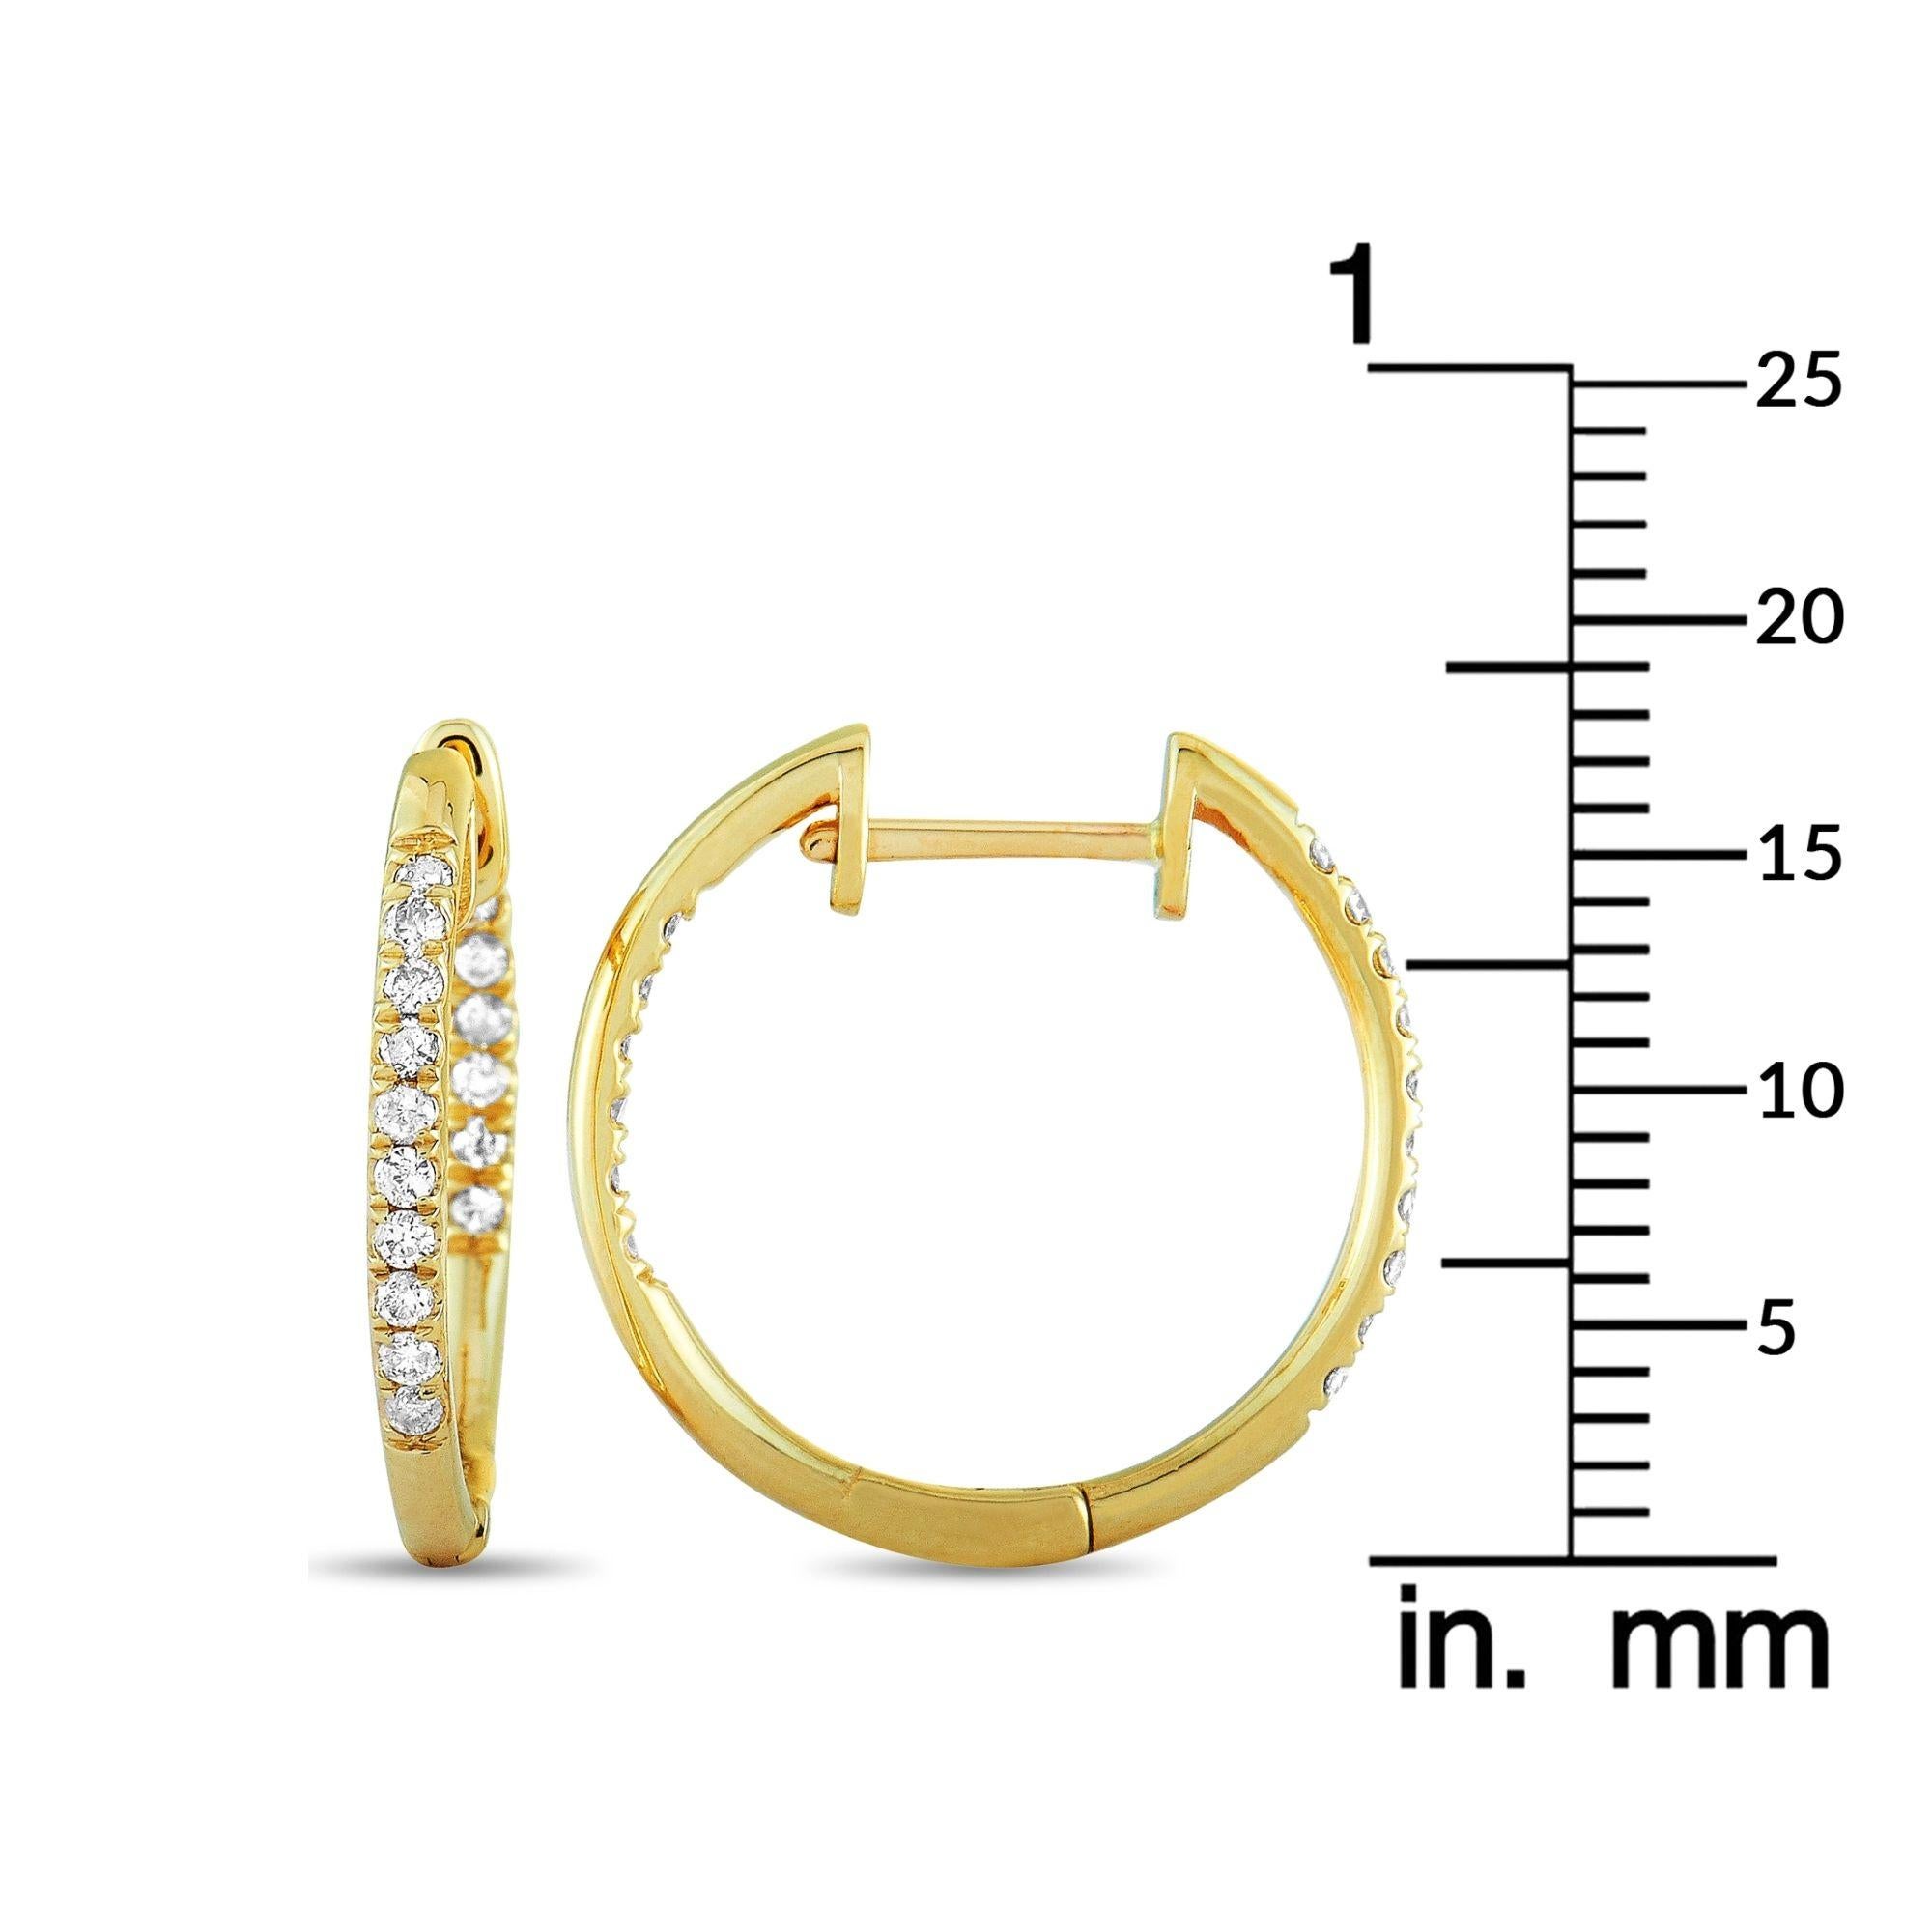 Lb Exclusive 14k Yellow Gold 0.25 Carat Diamond Hoop Earrings In New Condition For Sale In Southampton, PA